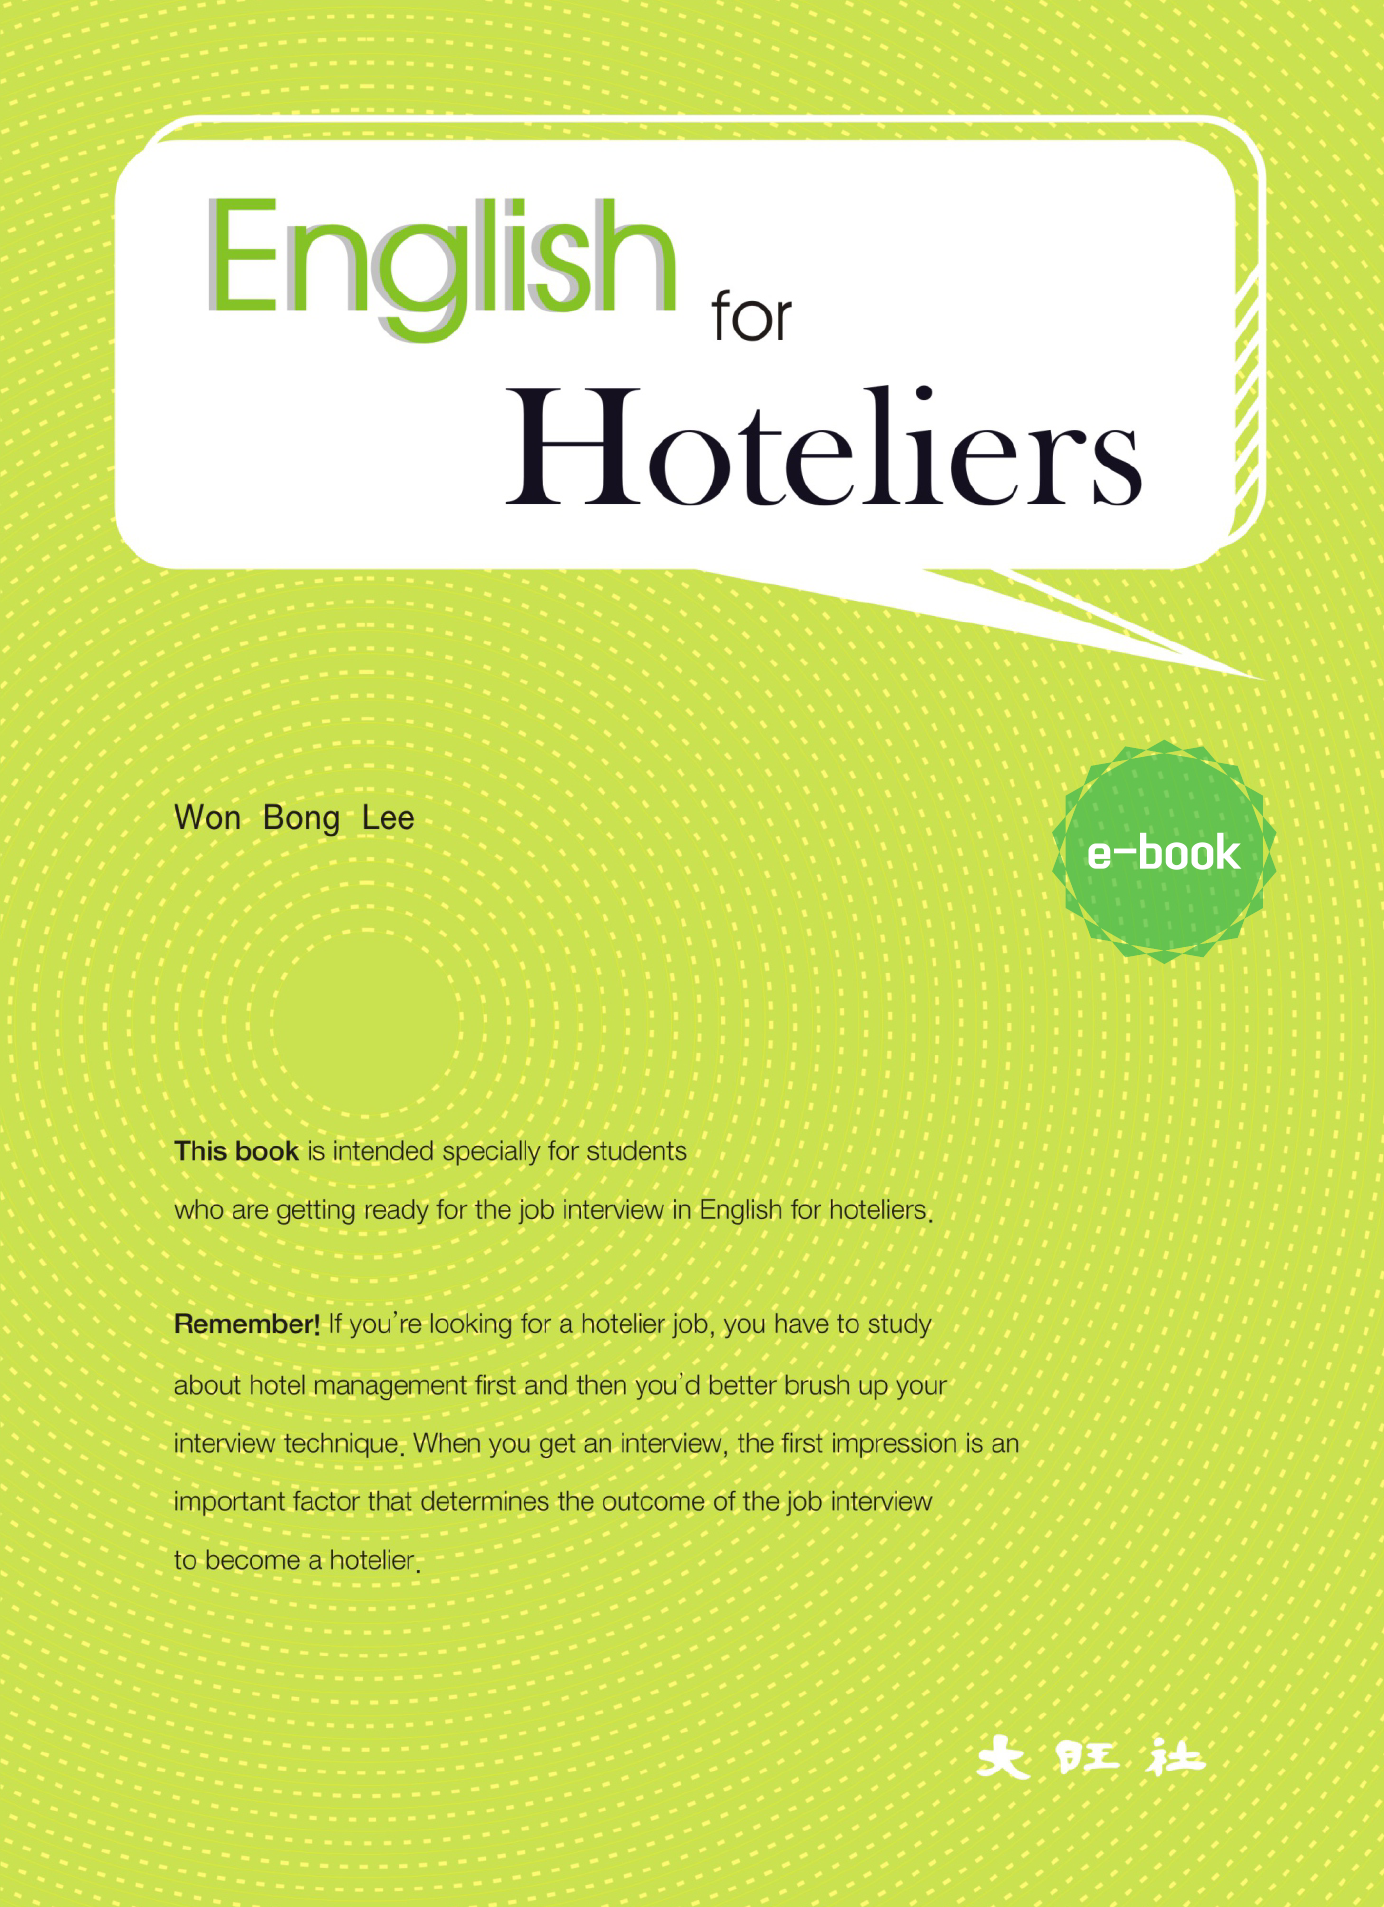 English for Hoteliers